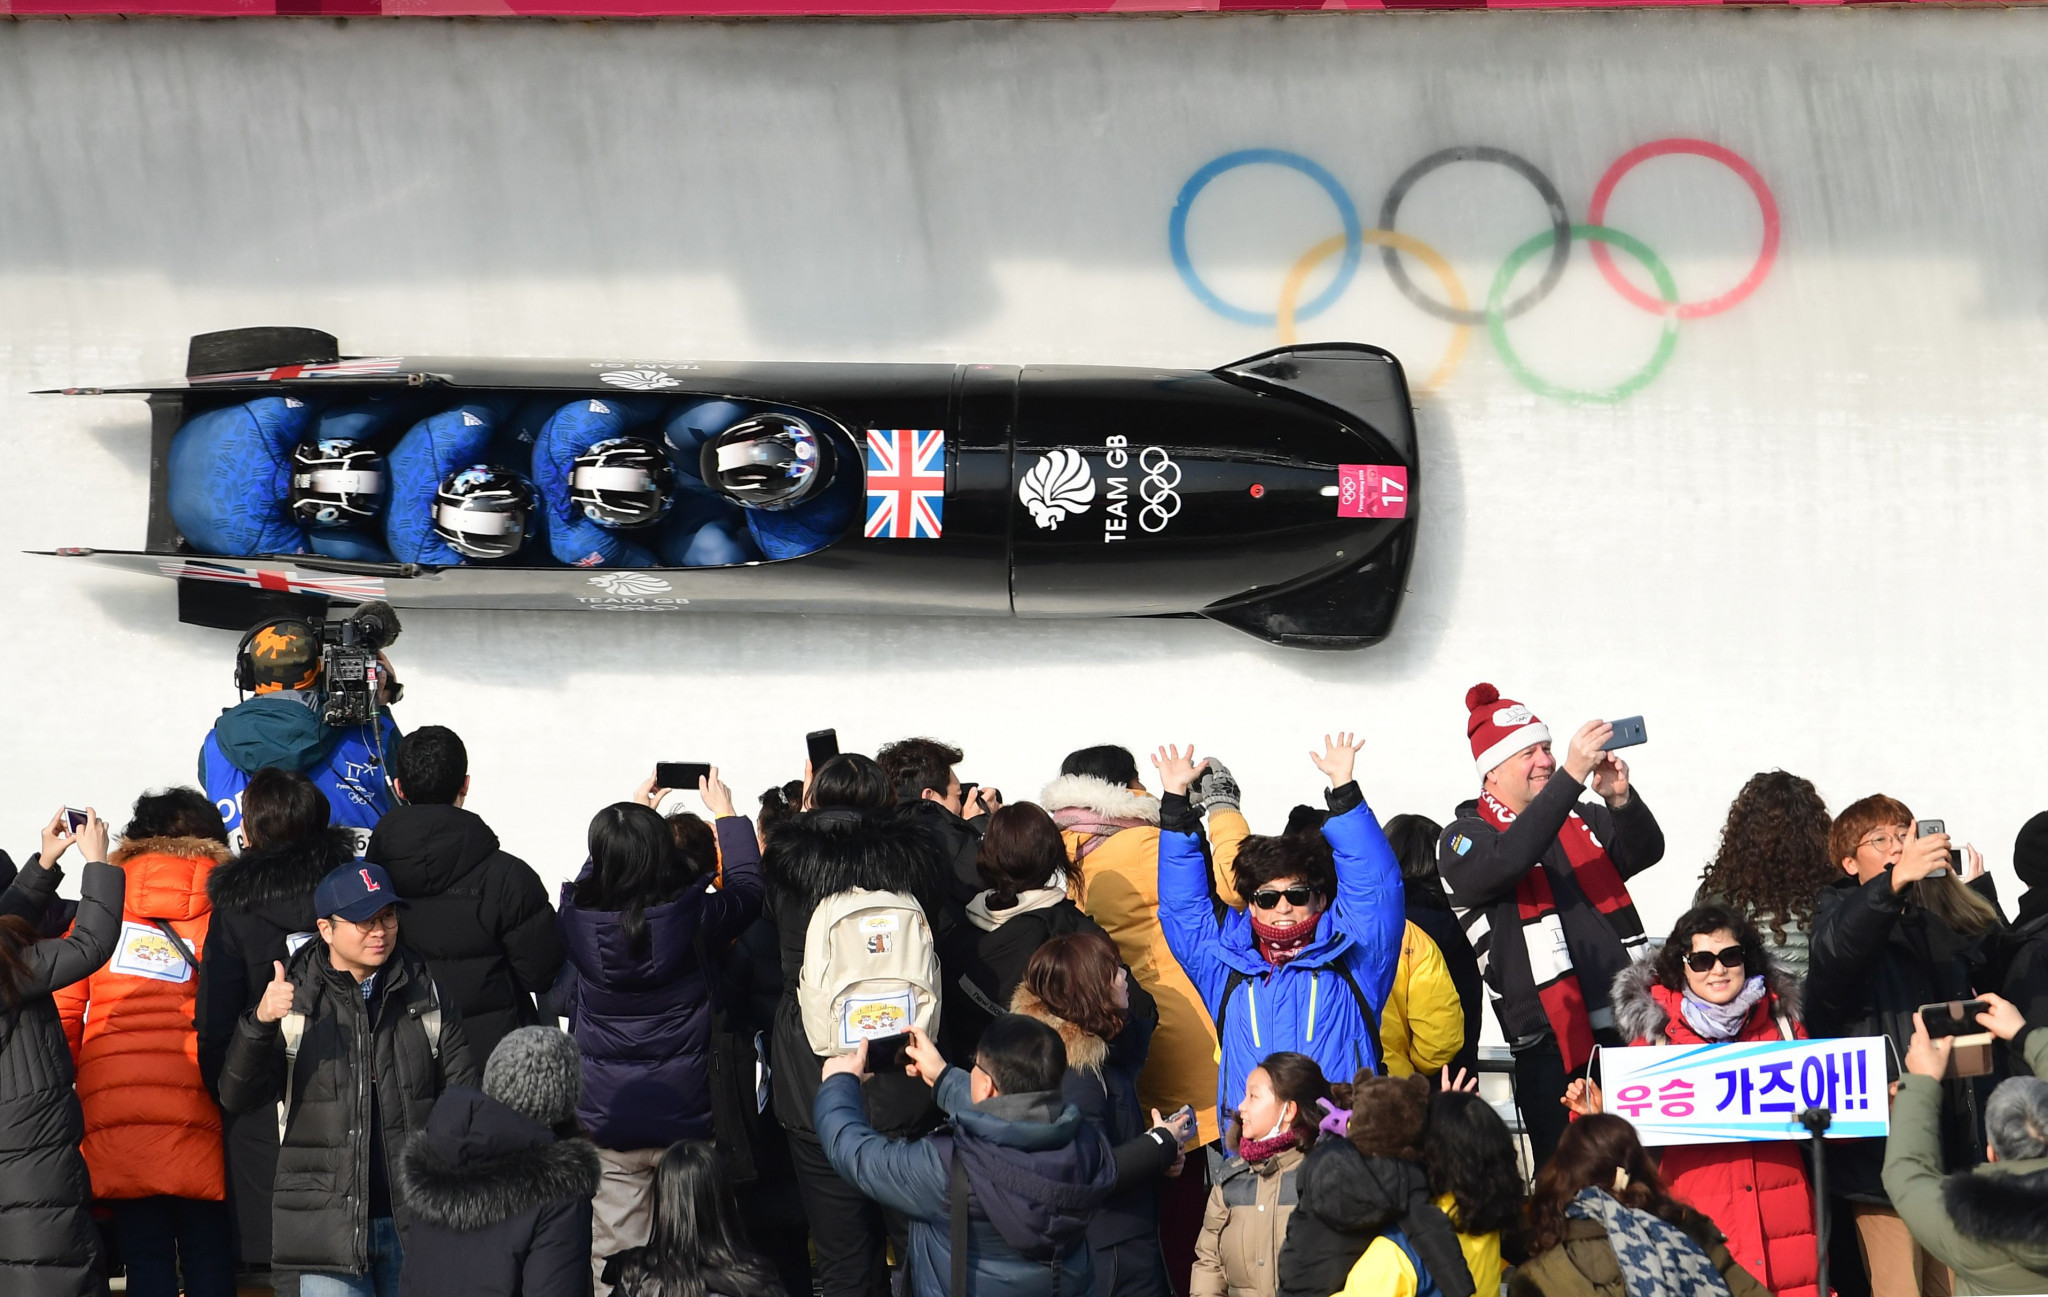 Britain's four-man bob teams failed to reach their target of top five finishes at Pyeongchang 2018